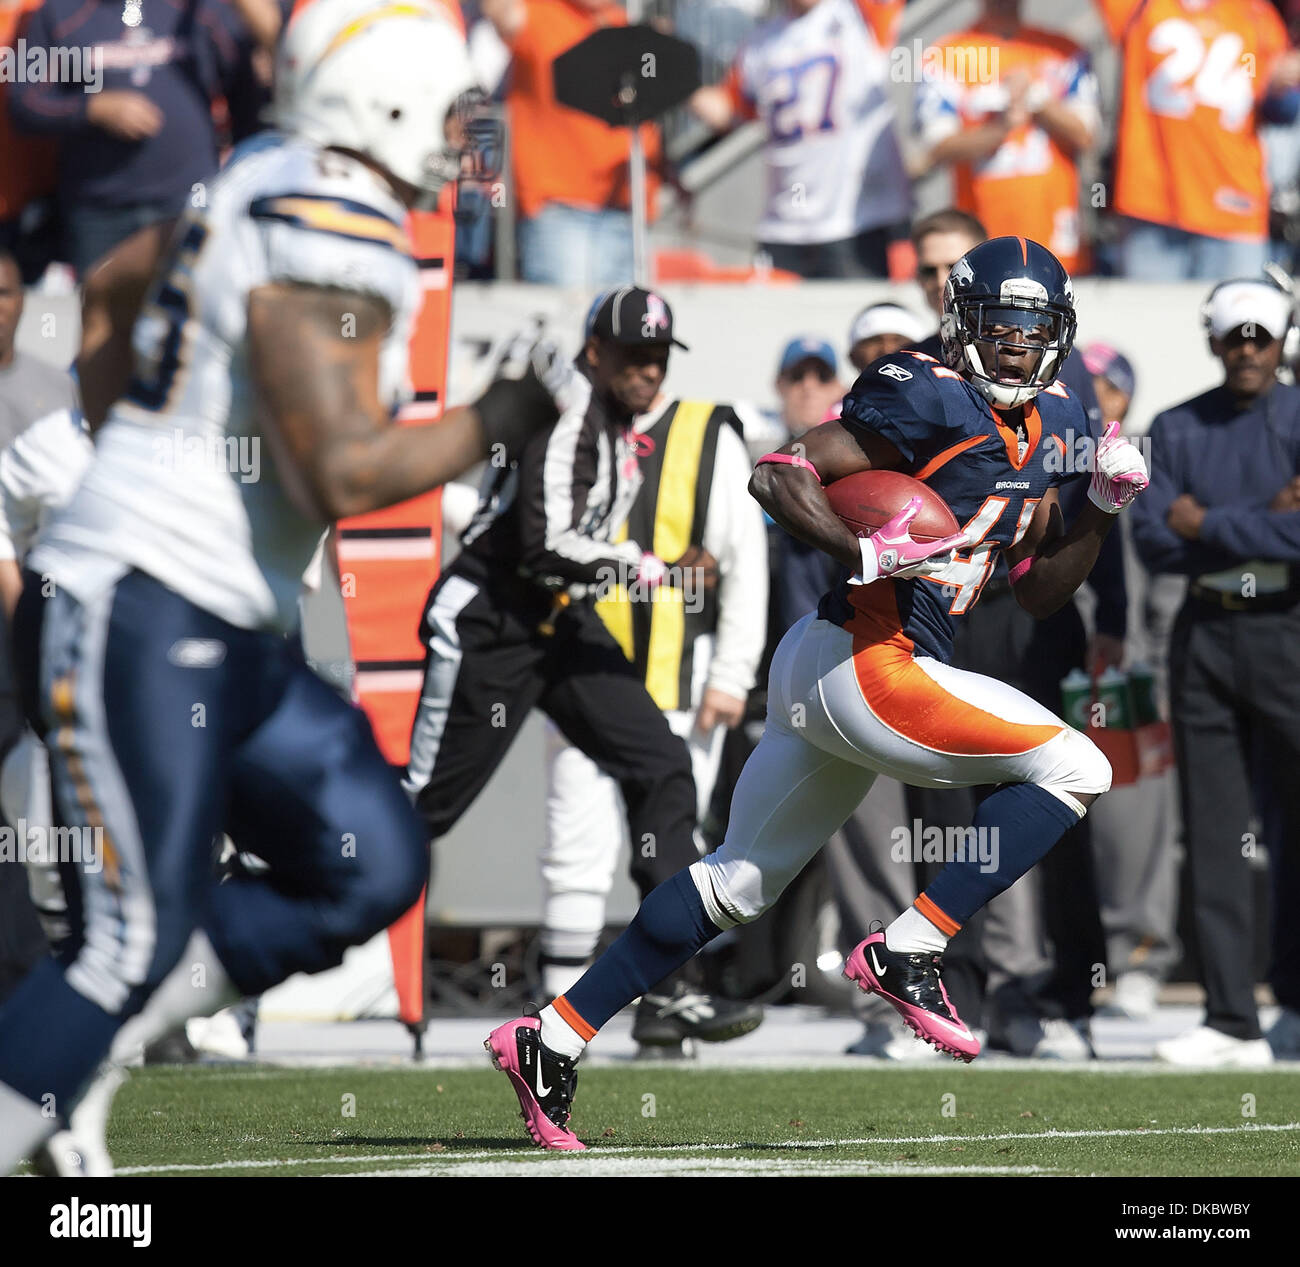 Oct. 9, 2011 - Denver, Colorado, U.S. - Broncos CB CASSIUS VAUGHN runs for a TD in the 1st. half after intercepting a pass against the Chargers at Sports Authority Field at Mile High Sunday afternoon. Chargers beat the Broncos 29-24 (Credit Image: © Hector Acevedo/ZUMAPRESS.com) Stock Photo